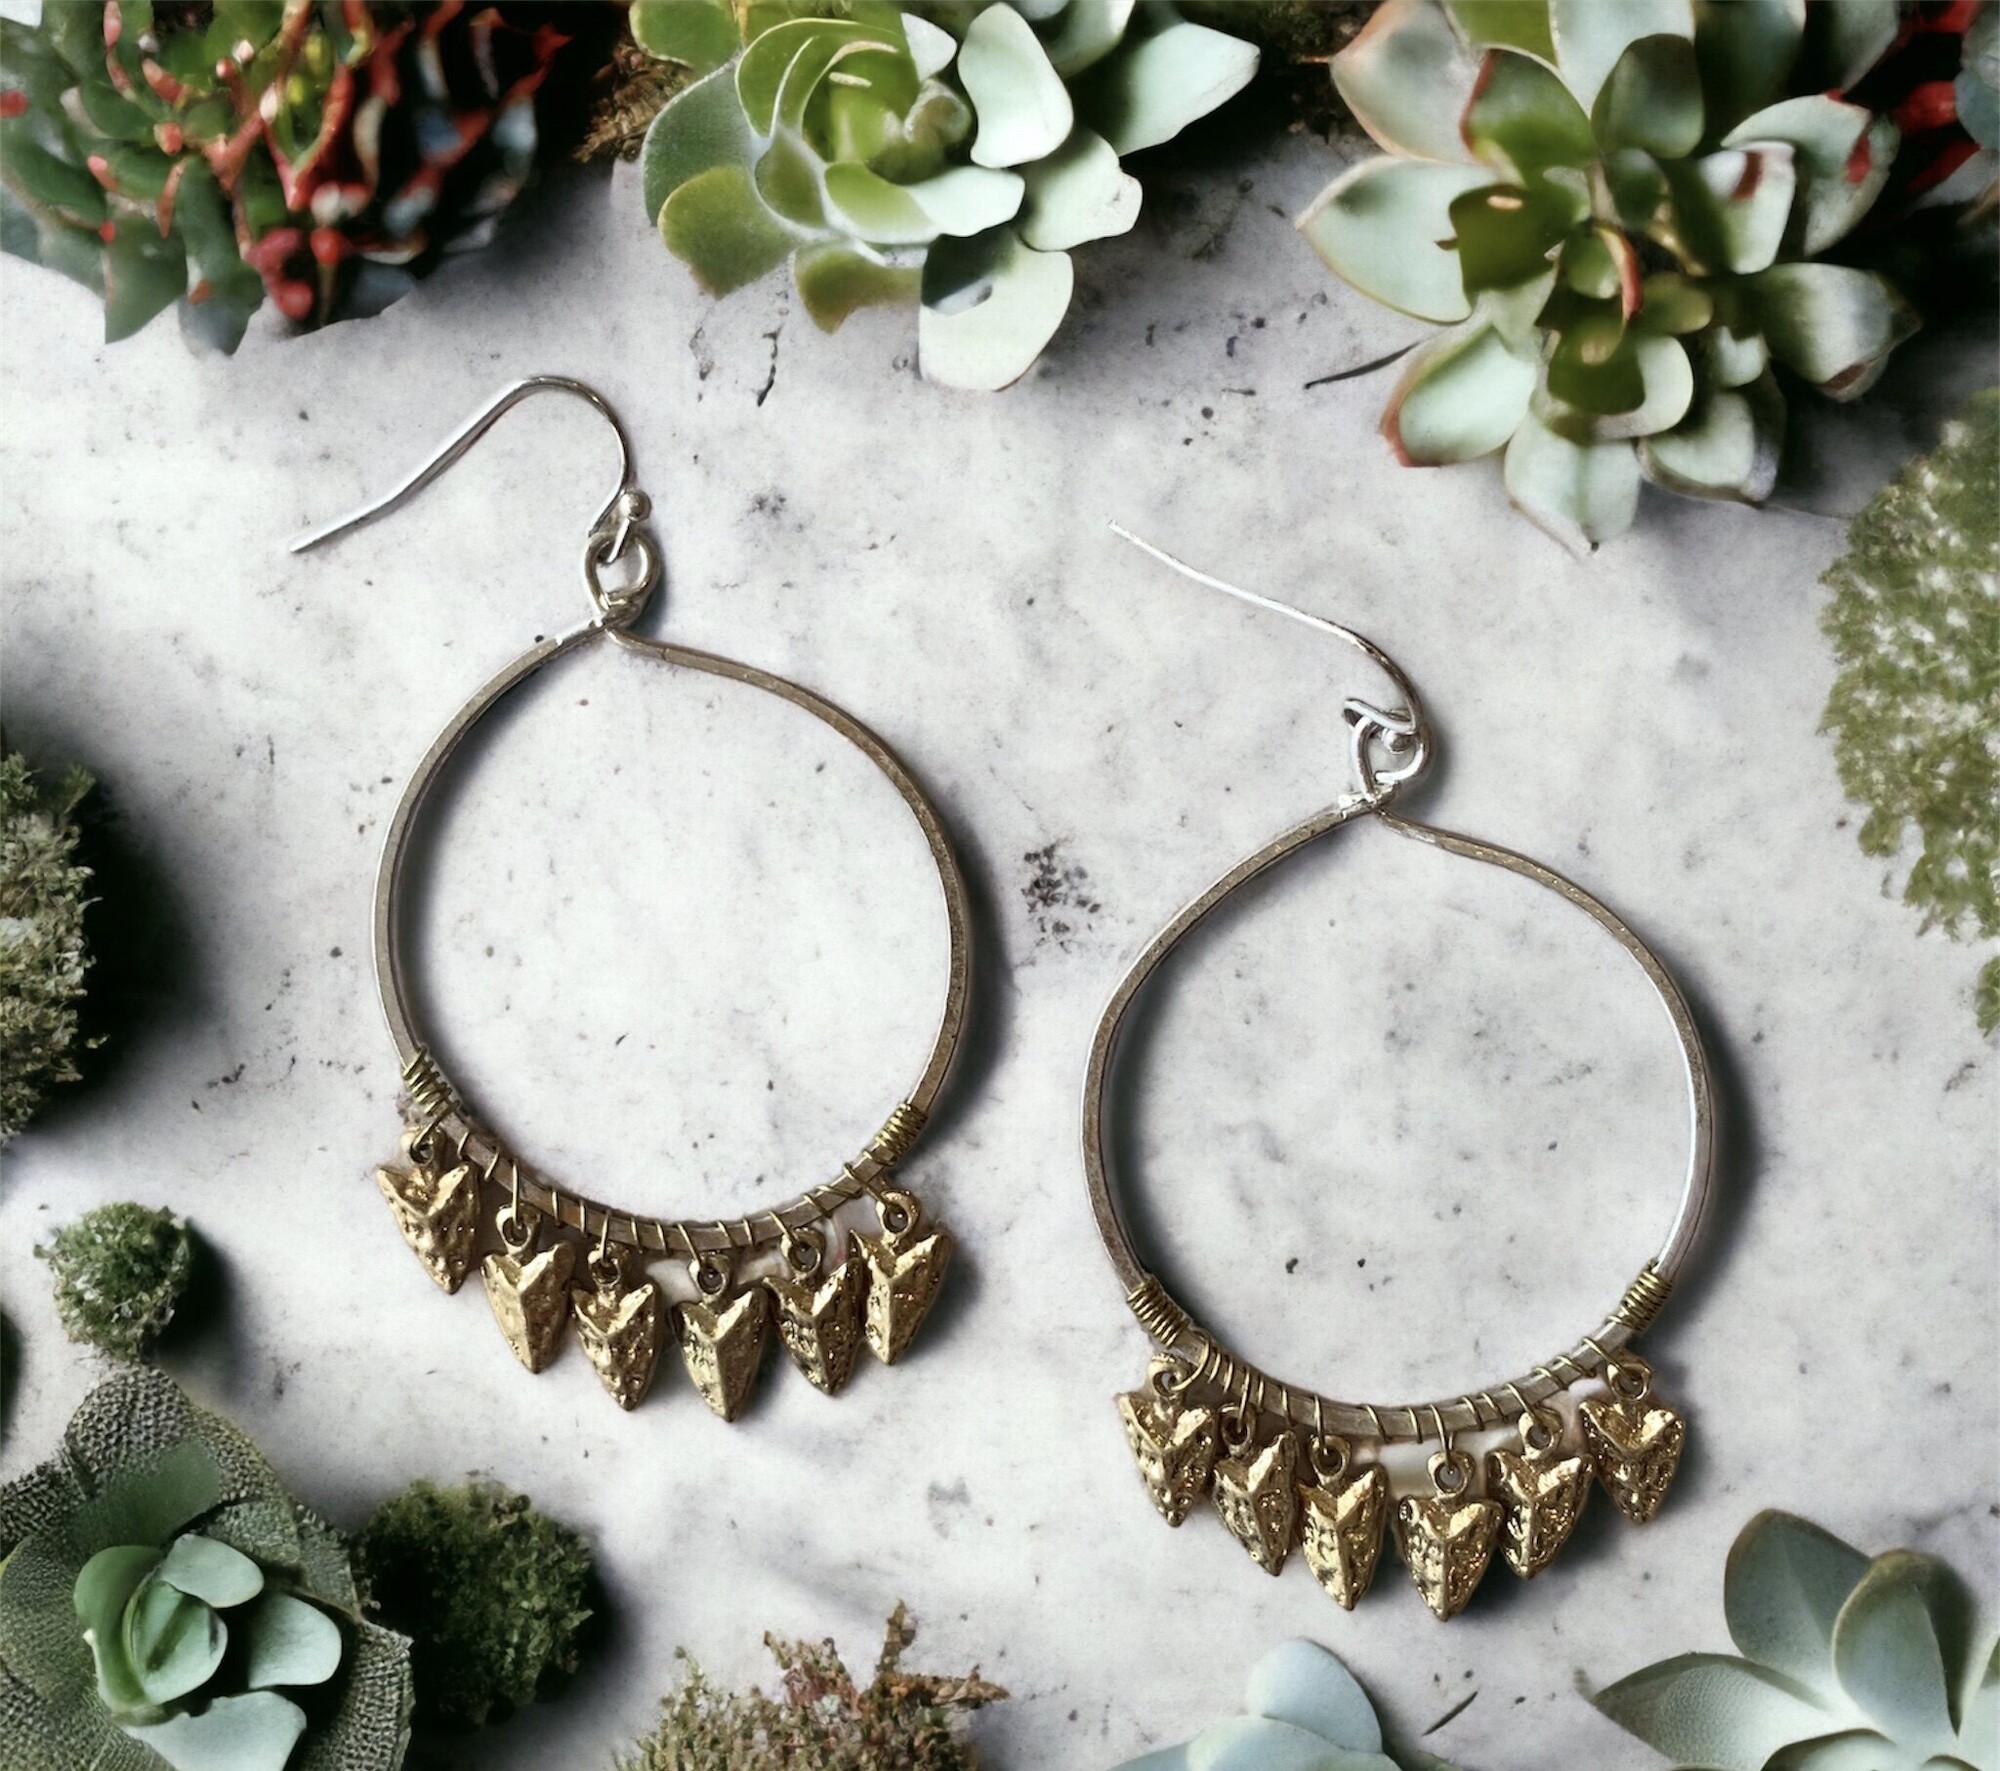 These beautiful earrings measure 2.25 inches long!